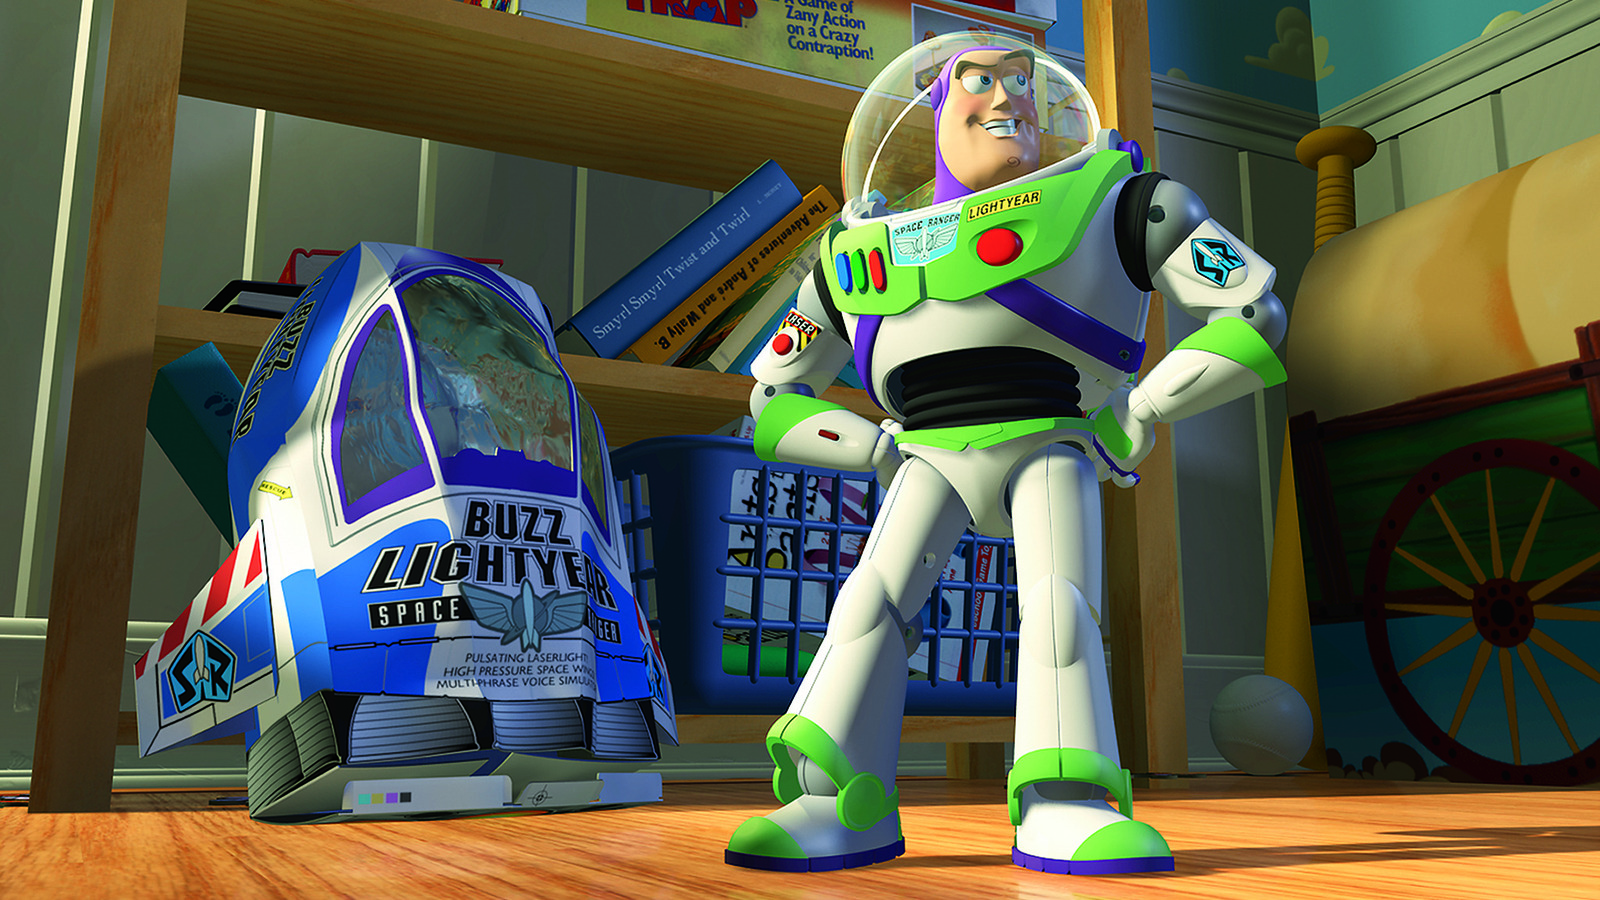 Toy Story Launched One Of Cinema’s Most Reliable Hit-Makers